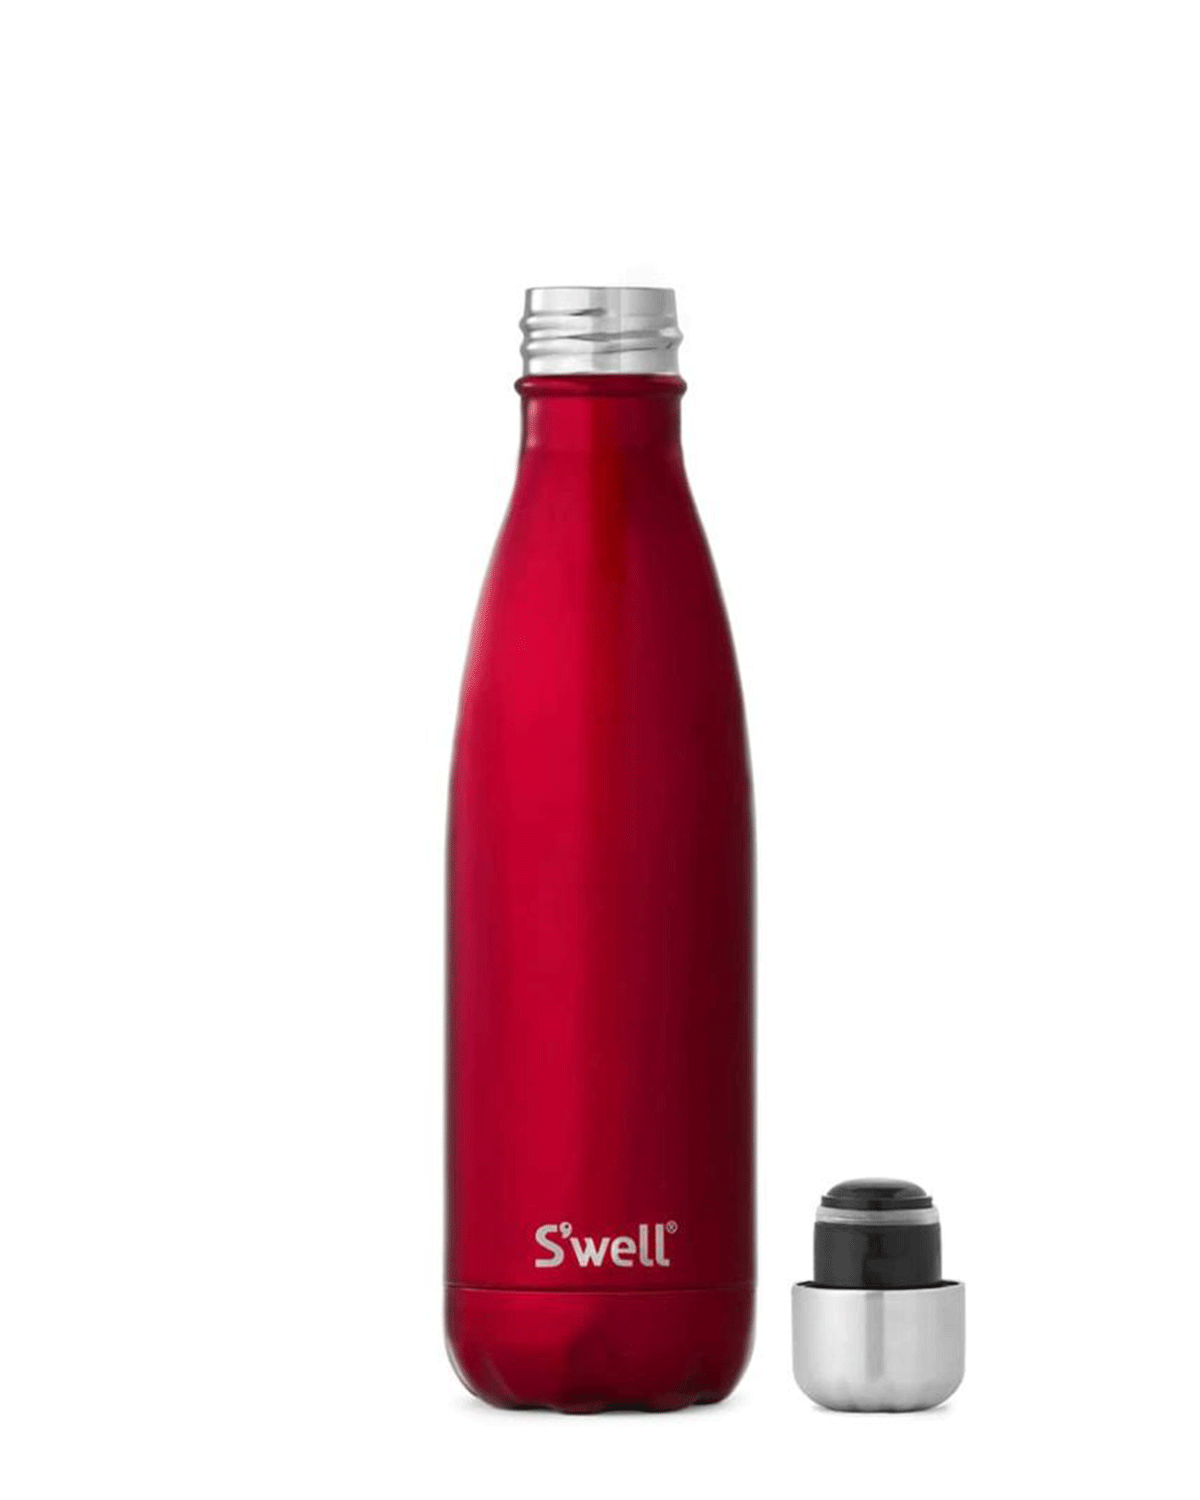 S'well Rowboat Red 17 oz Bottle